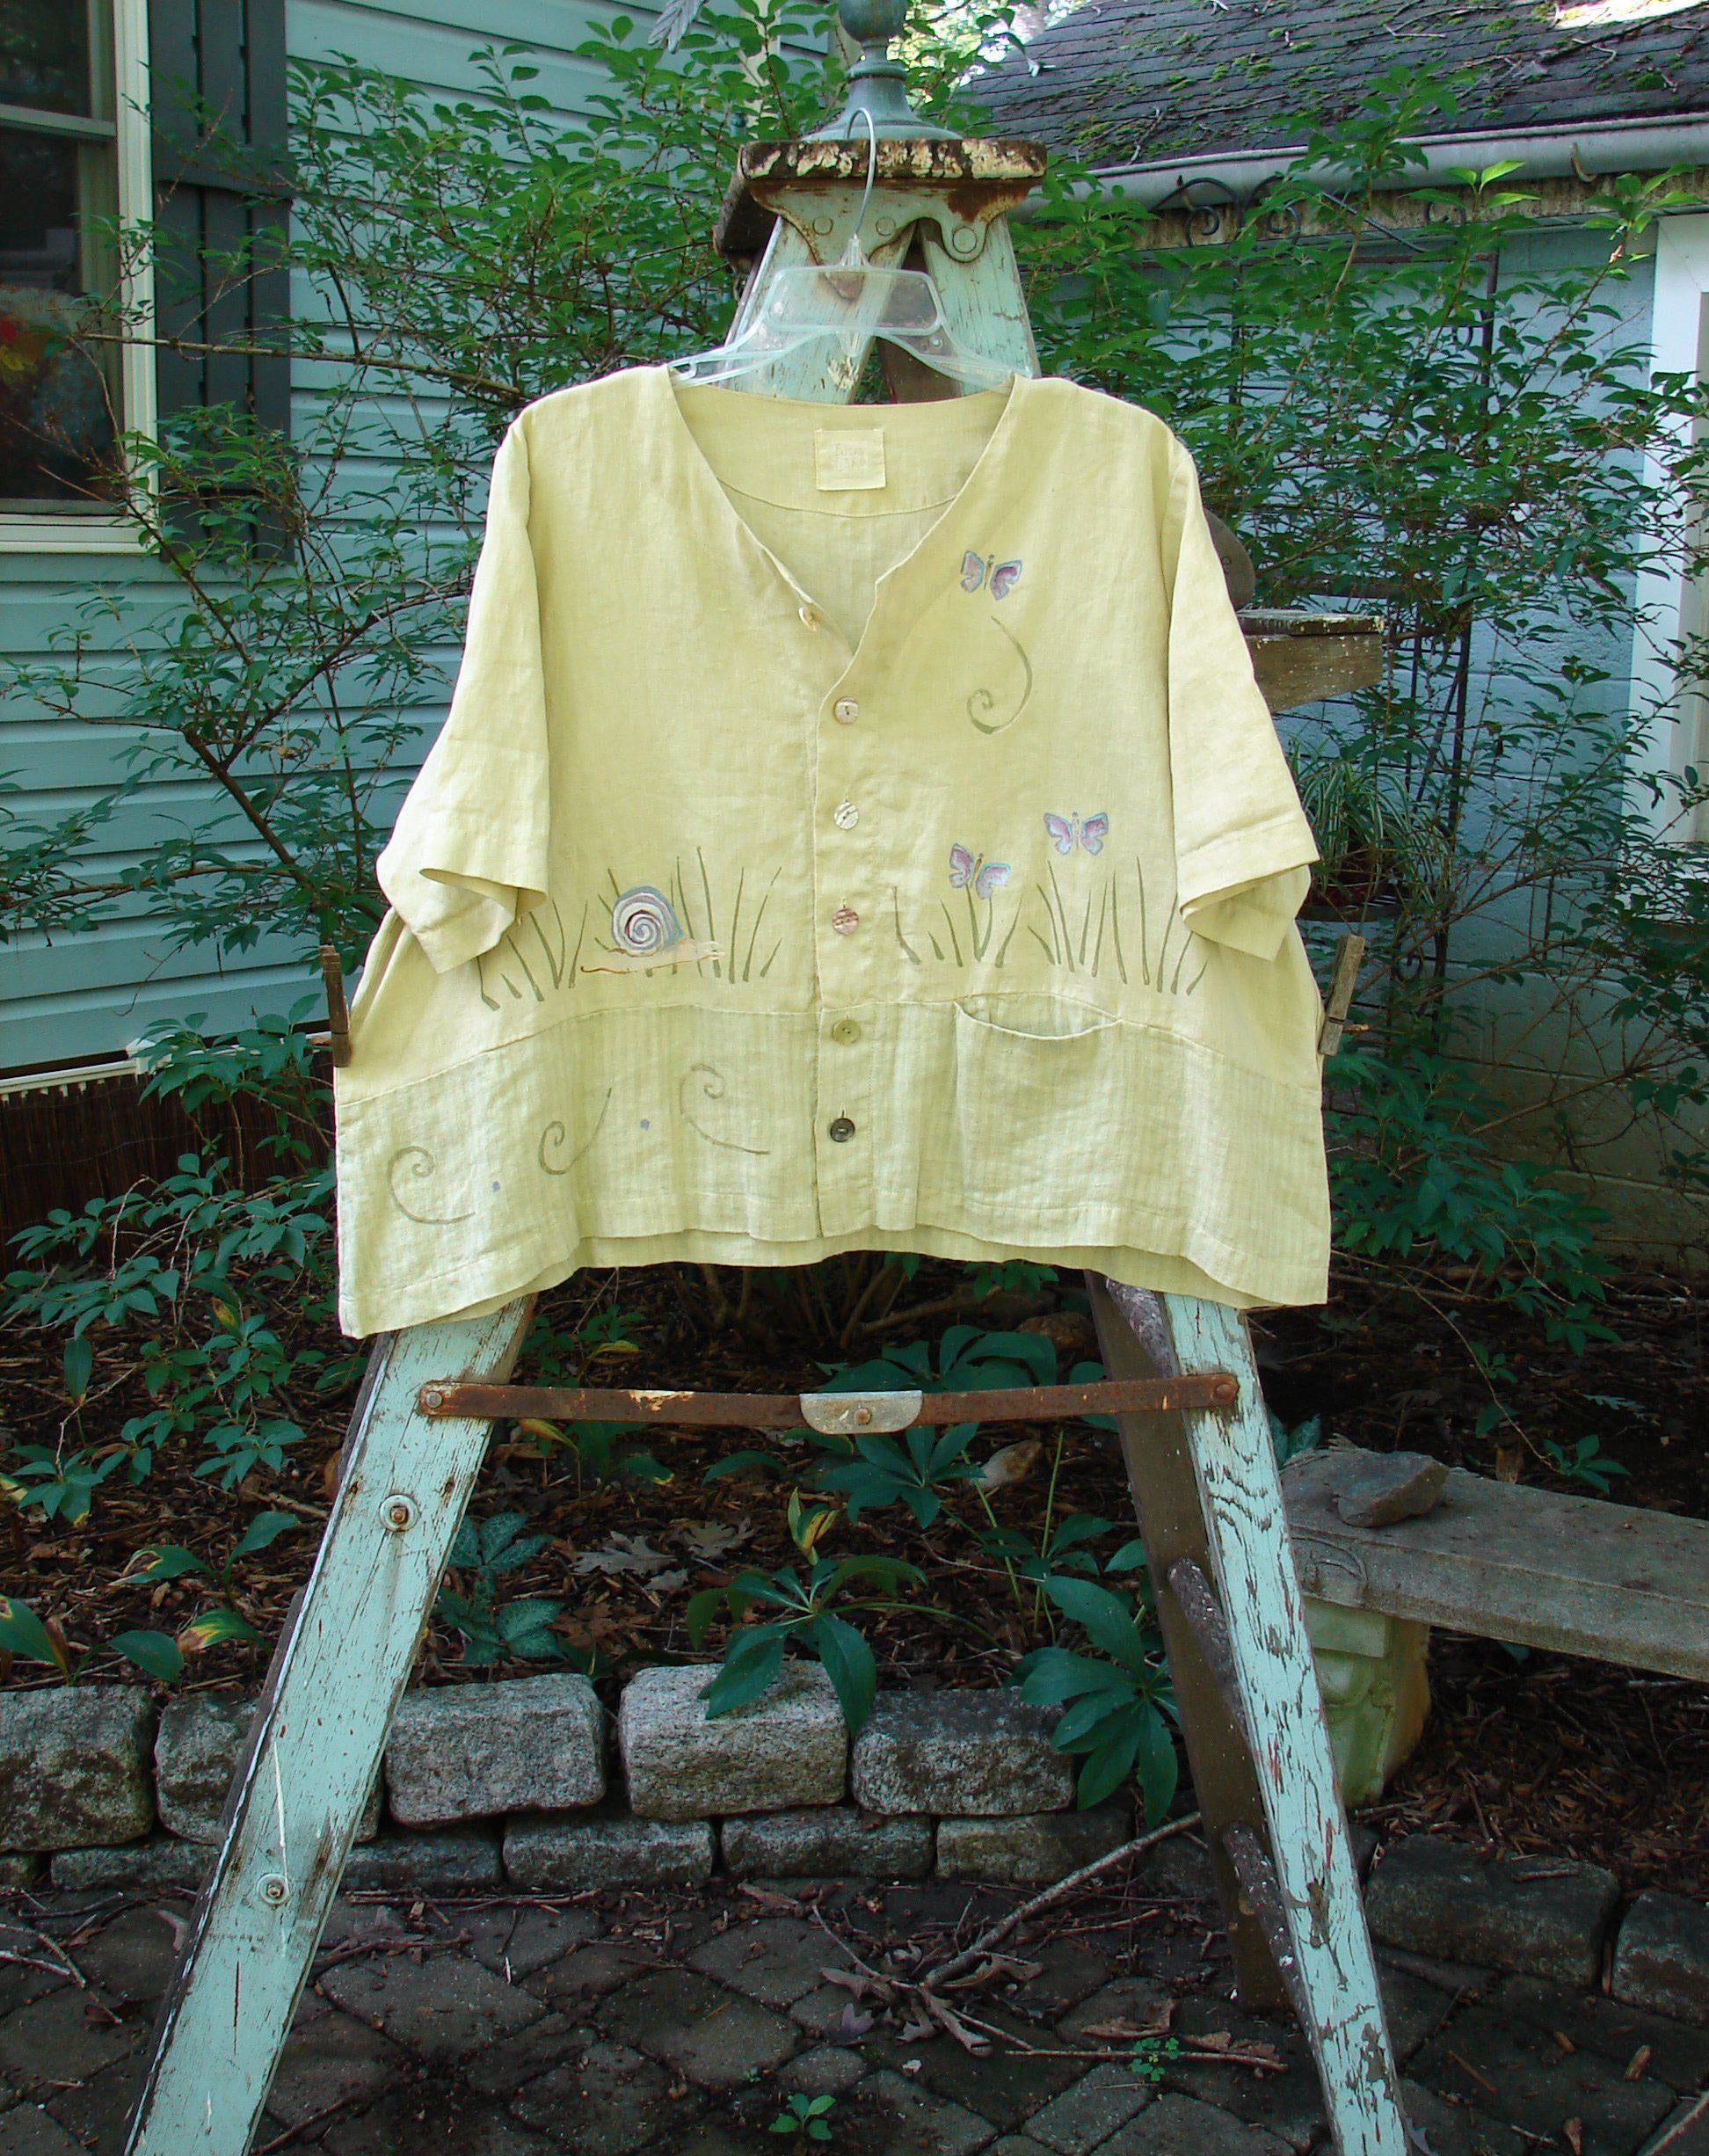 1999 Cabana Top Butterfly Grass Citron Size 2: A yellow shirt with butterflies and snails on it, featuring a slight crop shape, shell buttons, and a varying hemline. Made from light textured linen, this top is simply flowing and light with a substantial weave. It also includes a double paneled contrasting fabric lower, a sweet drop pocket, and a signature Blue Fish patch and painted butterfly in the grass theme paint. Bust: 52, Waist: 54, Hips Hem Circumference: 60, Length: 23 inches.